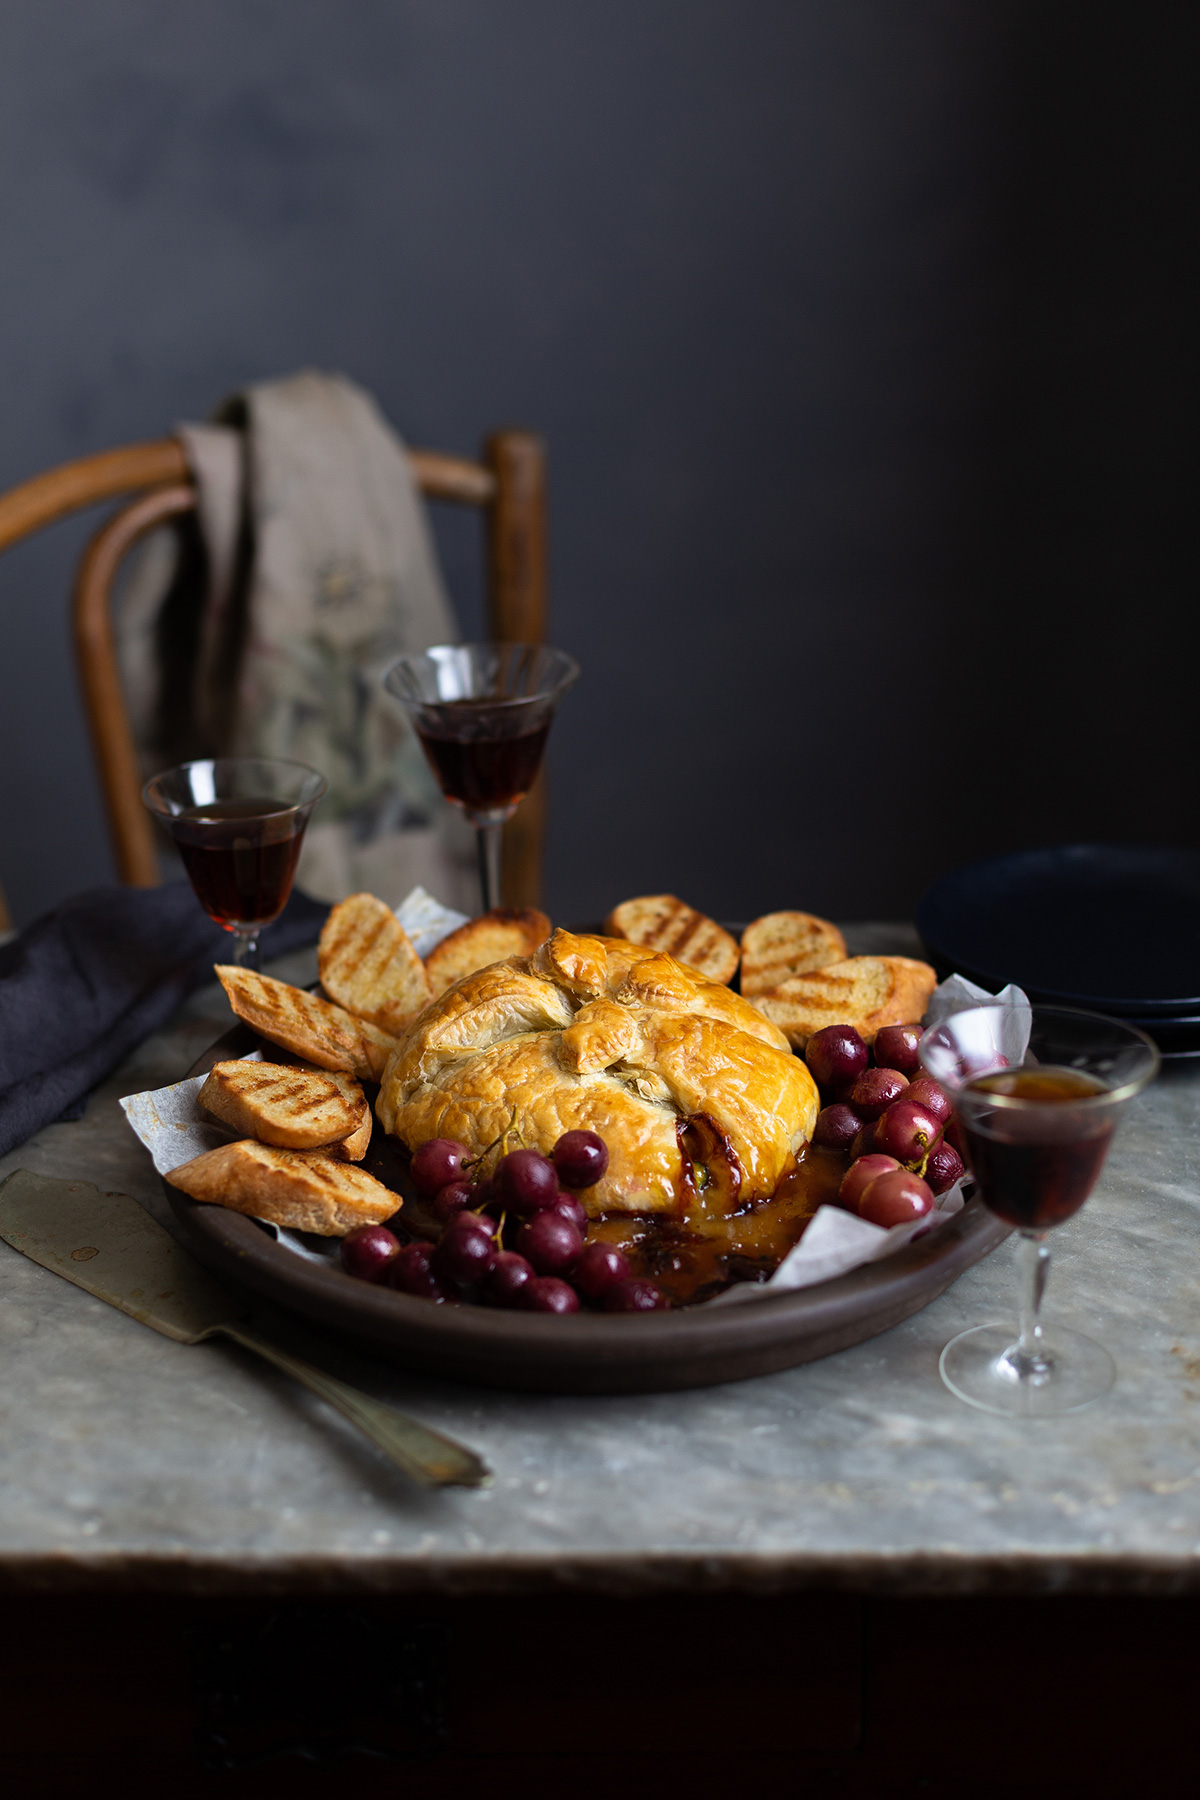 Camembert baked in puff pastry with raisins